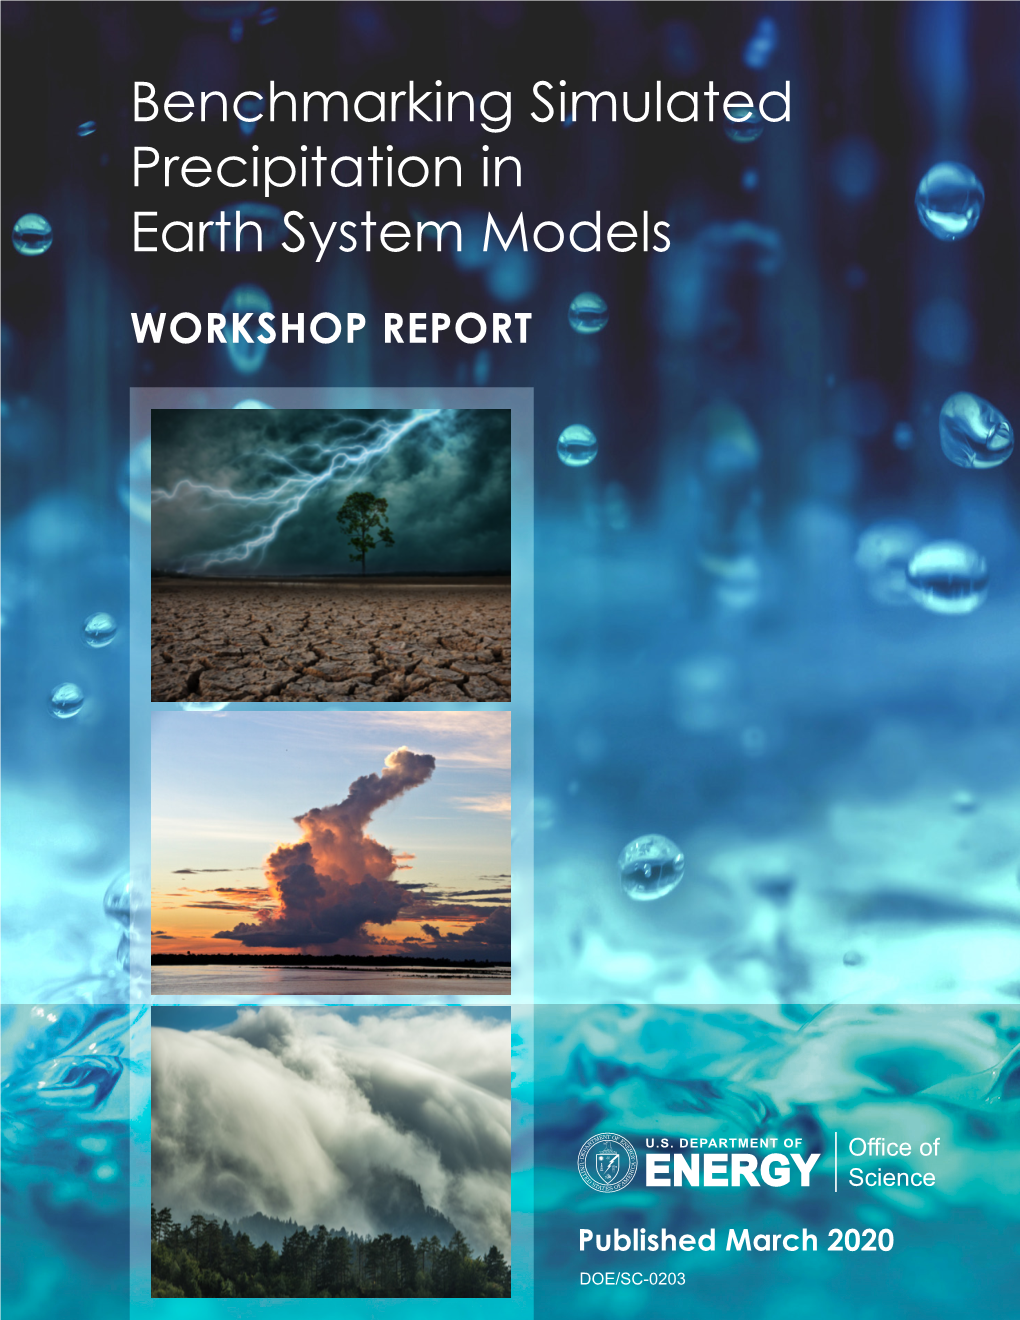 Benchmarking Simulated Precipitation in Earth System Models